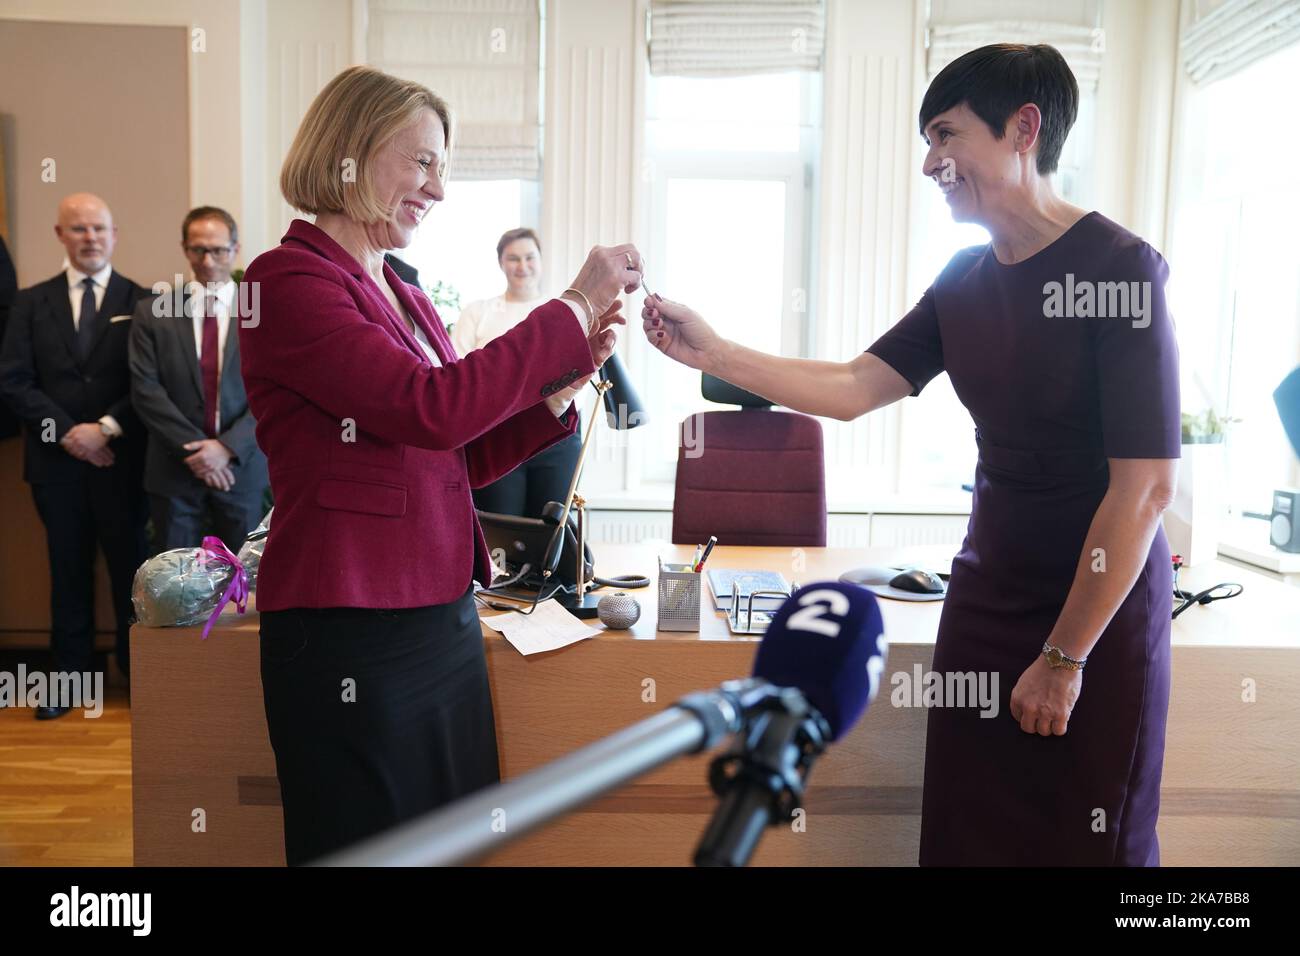 Oslo 20211014. Upcoming Foreign Minister Anniken Huitfeldt (Labor Party) and outgoing Foreign Minister Ine Marie Eriksen Soreide (H) during the key handover at the Ministry of Foreign Affairs in Oslo on Thursday. Photo: Haakon Mosvold Larsen / NTB  Stock Photo